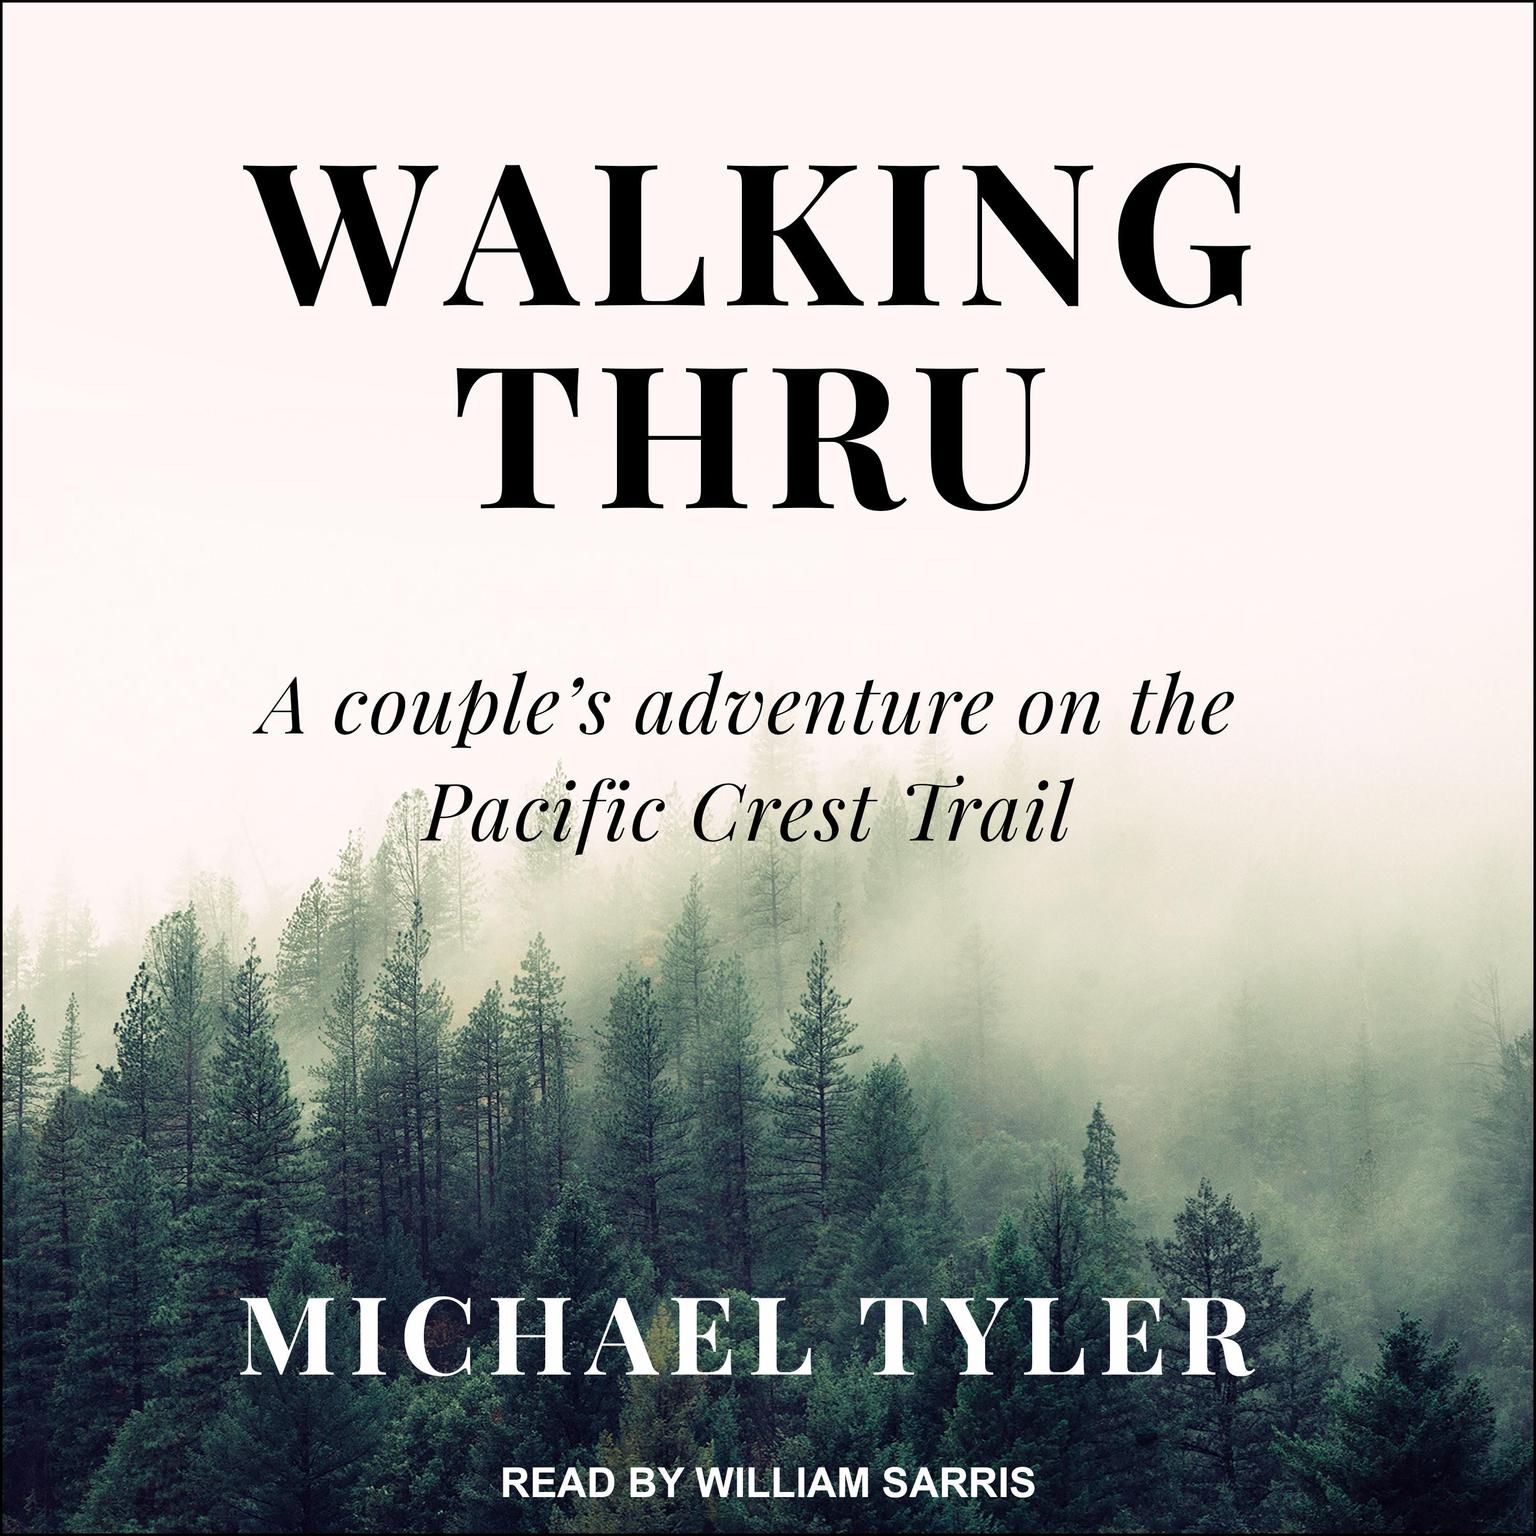 Walking Thru: A Couple’s Adventure on the Pacific Crest Trail Audiobook, by Michael Tyler